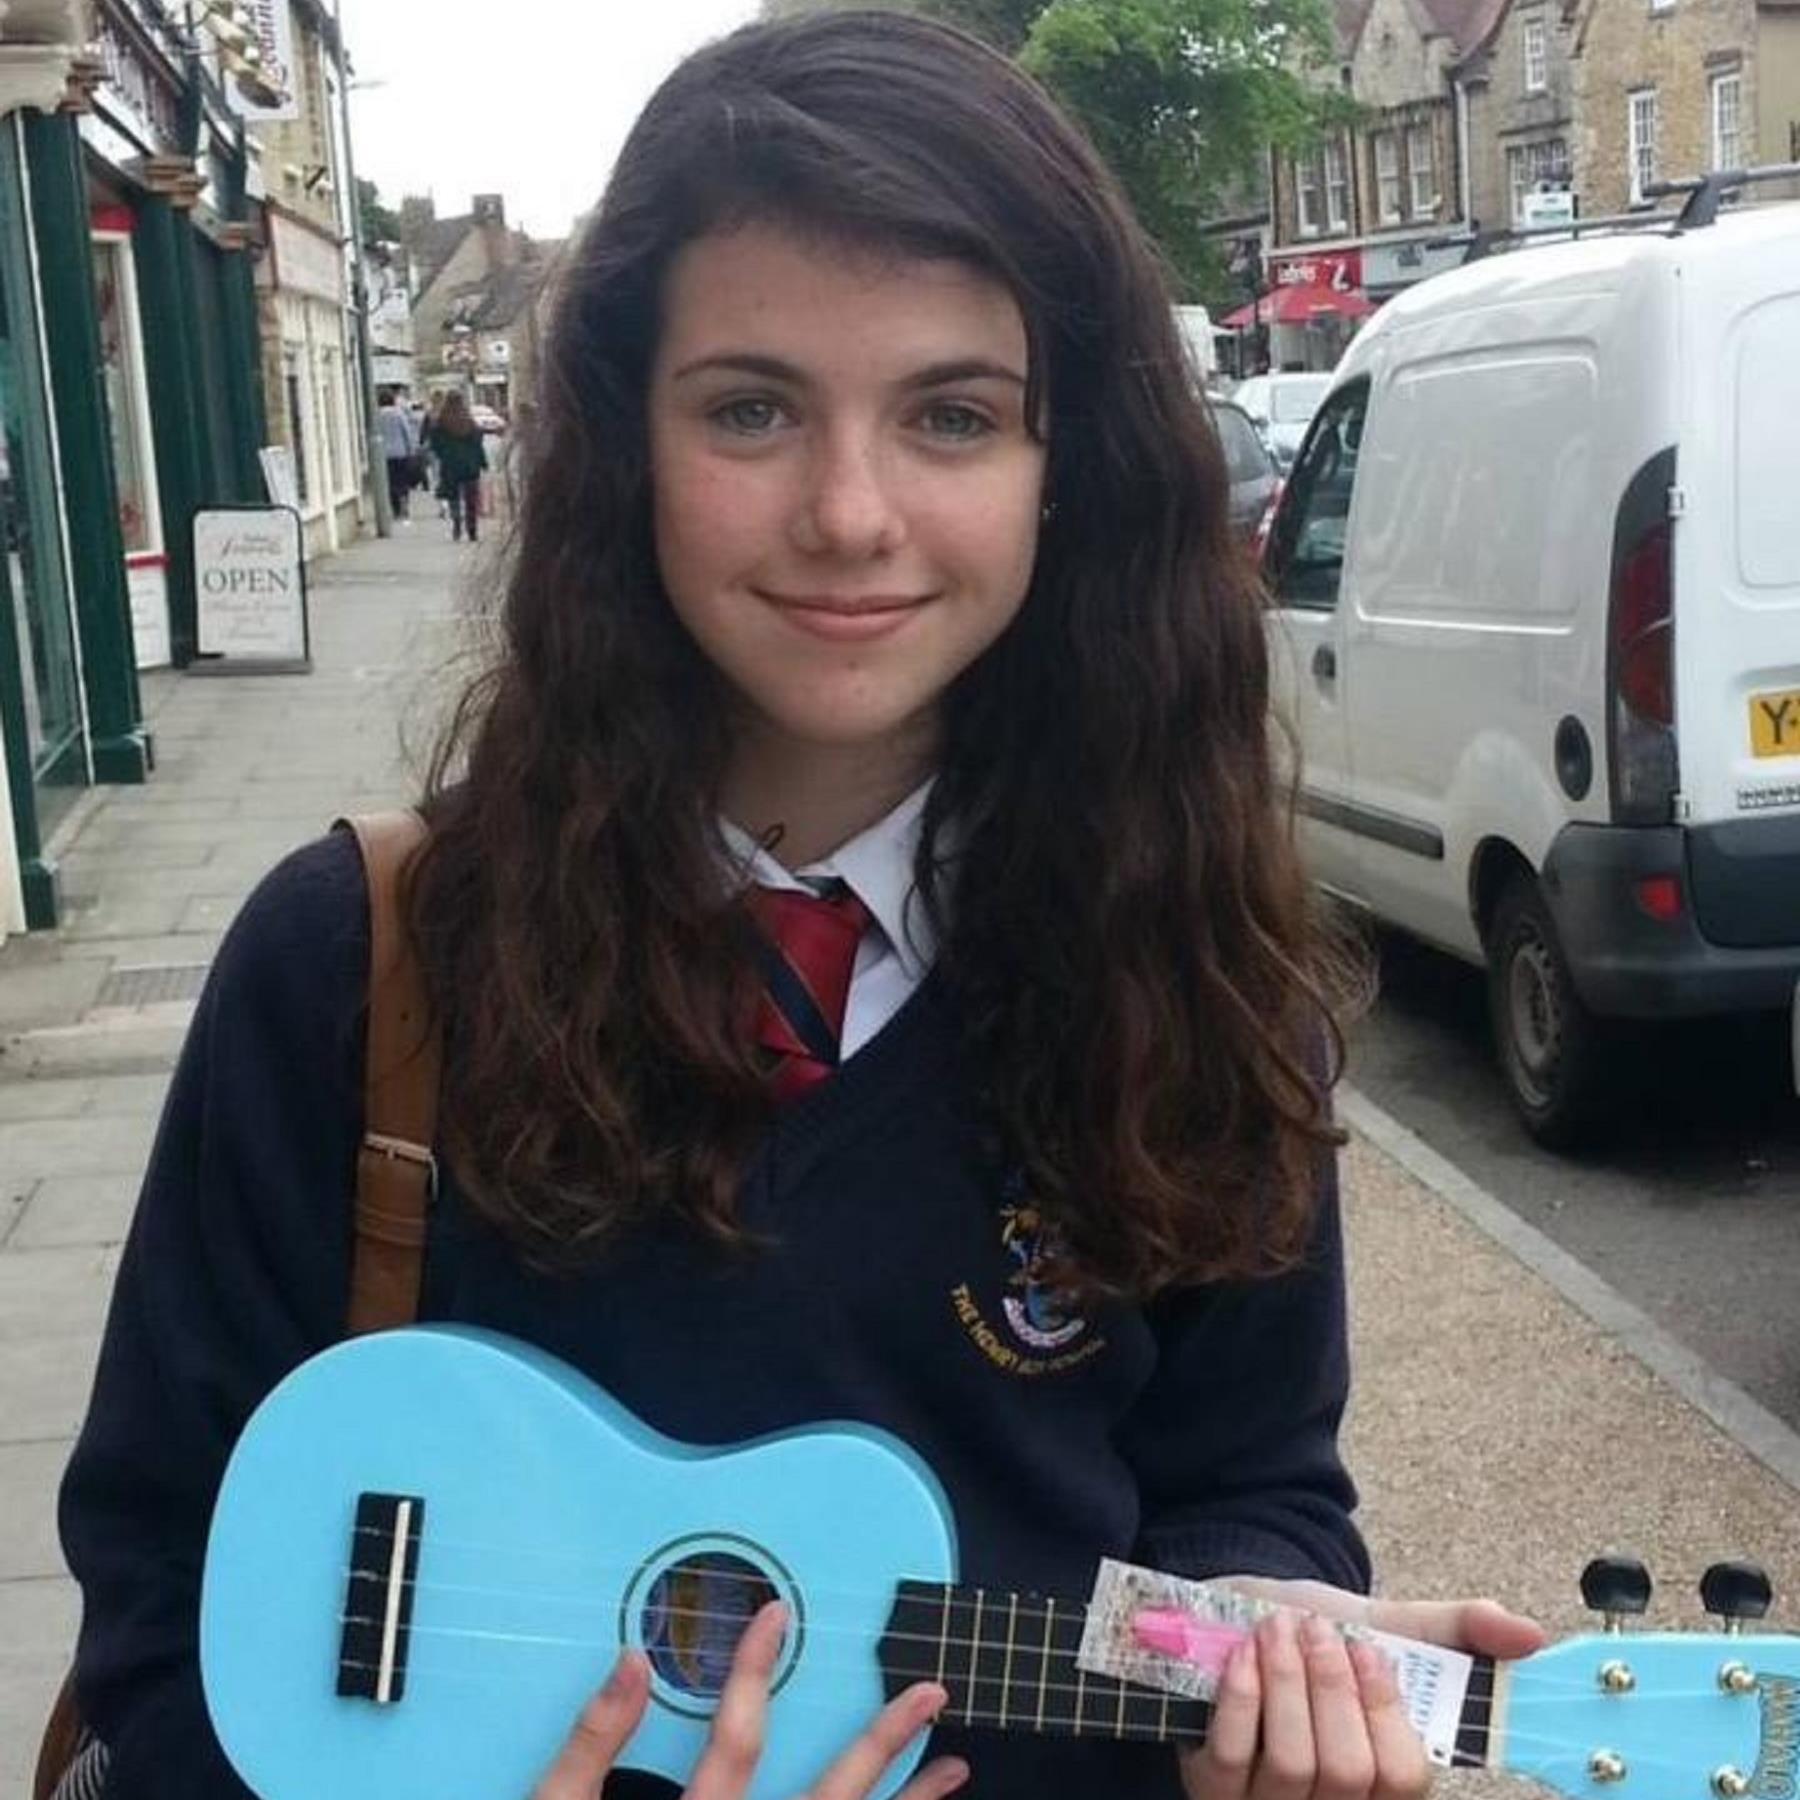 Our beautiful 14 year old daughter Liberty Baker was killed whilst walking to school by a dangerous  driver.